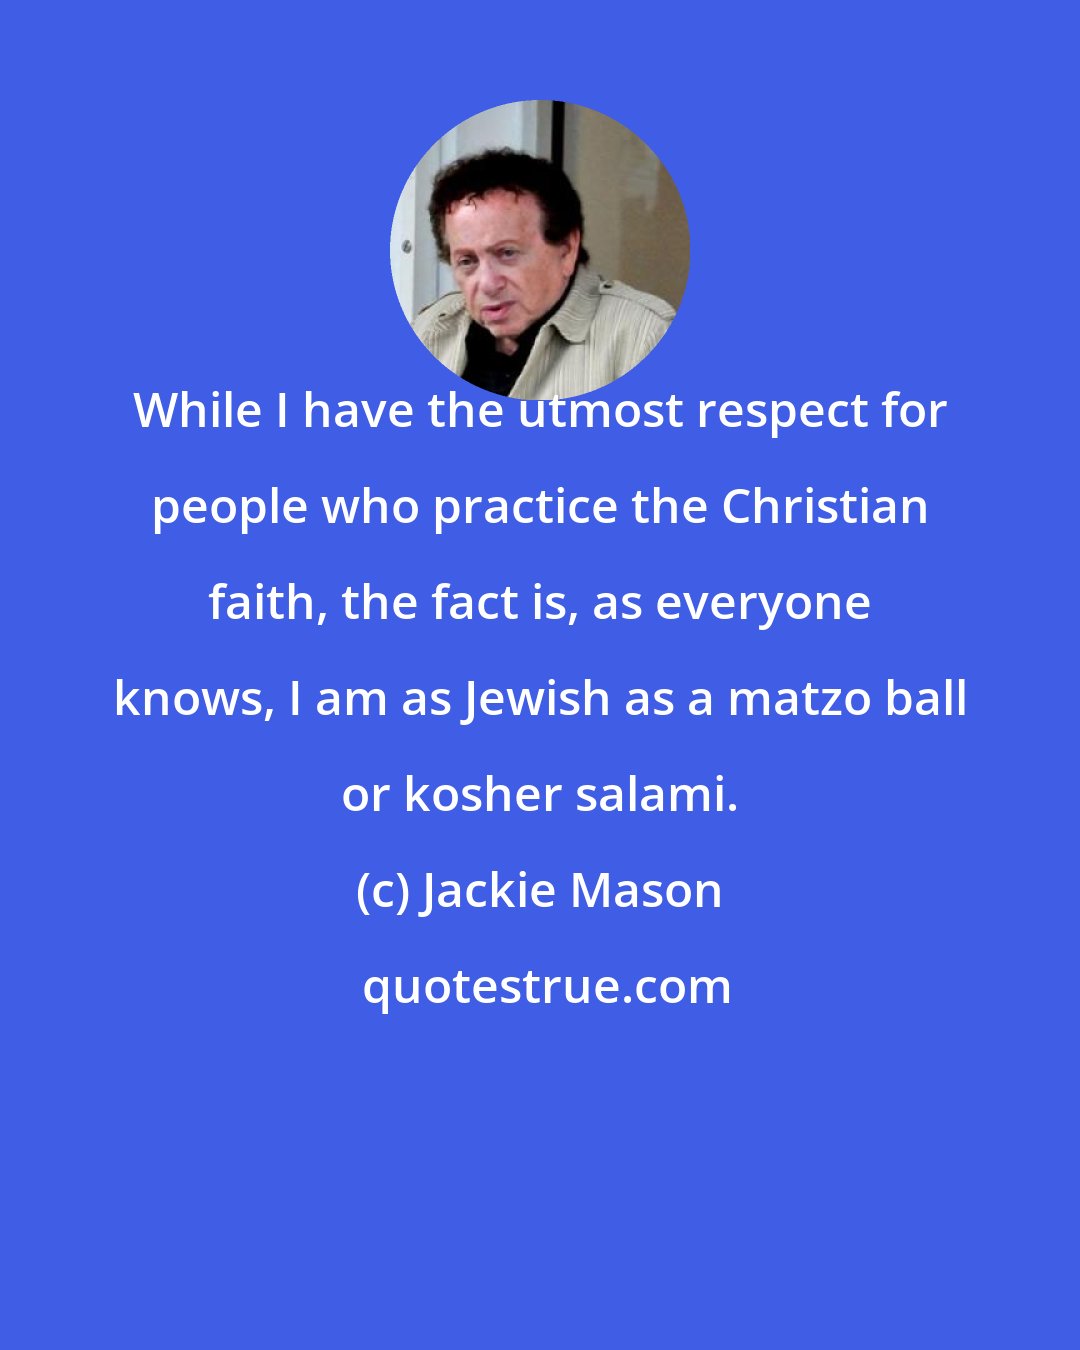 Jackie Mason: While I have the utmost respect for people who practice the Christian faith, the fact is, as everyone knows, I am as Jewish as a matzo ball or kosher salami.